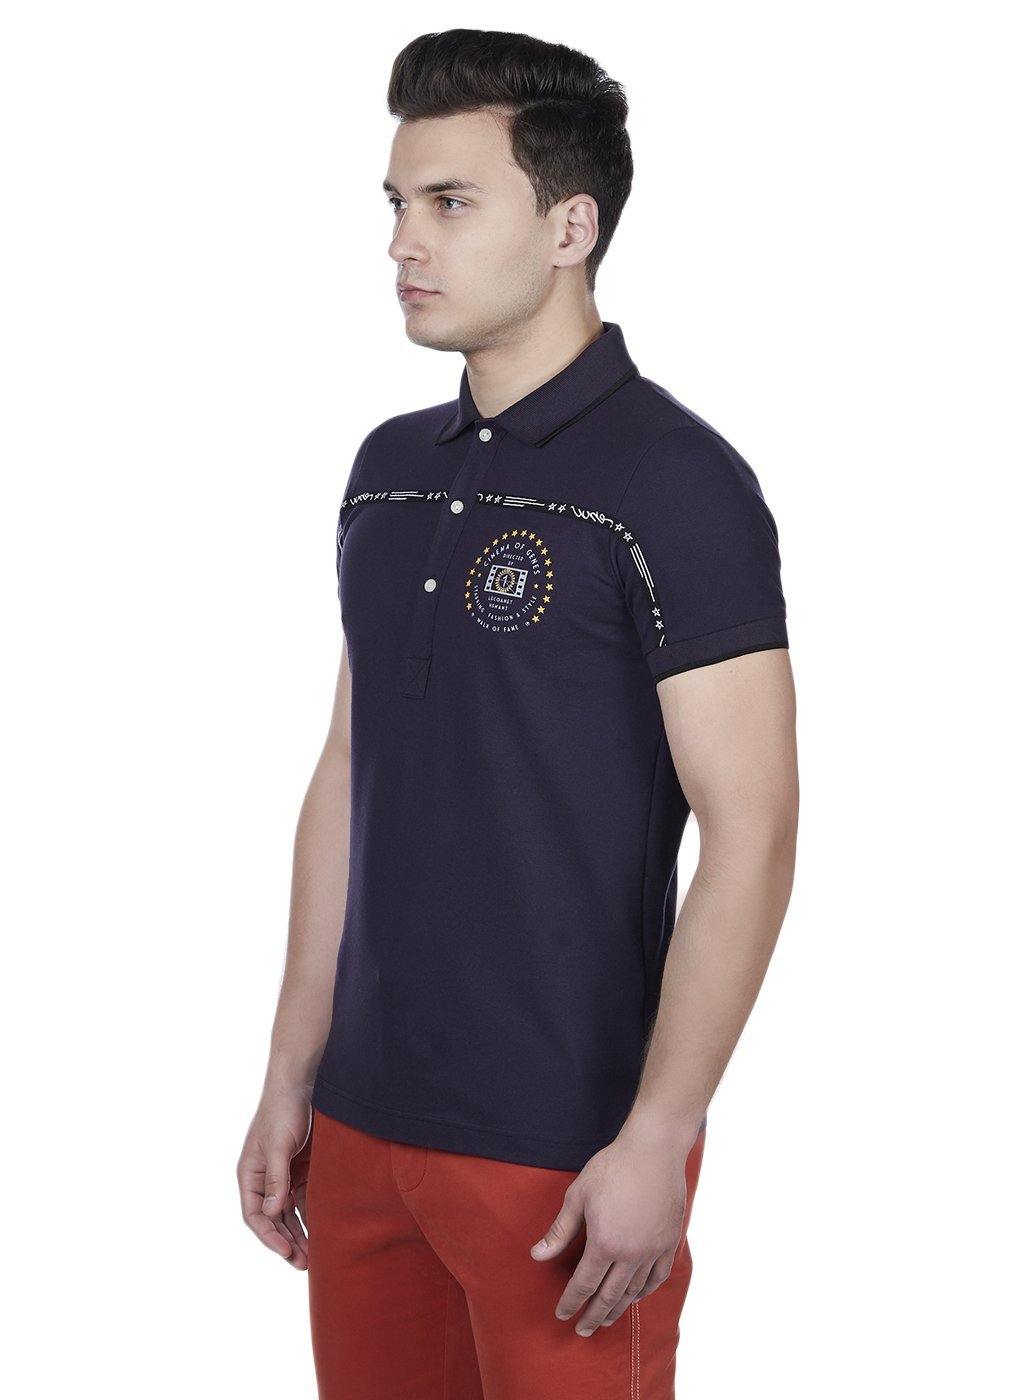 AUDITION POLO - Genes online store 2020